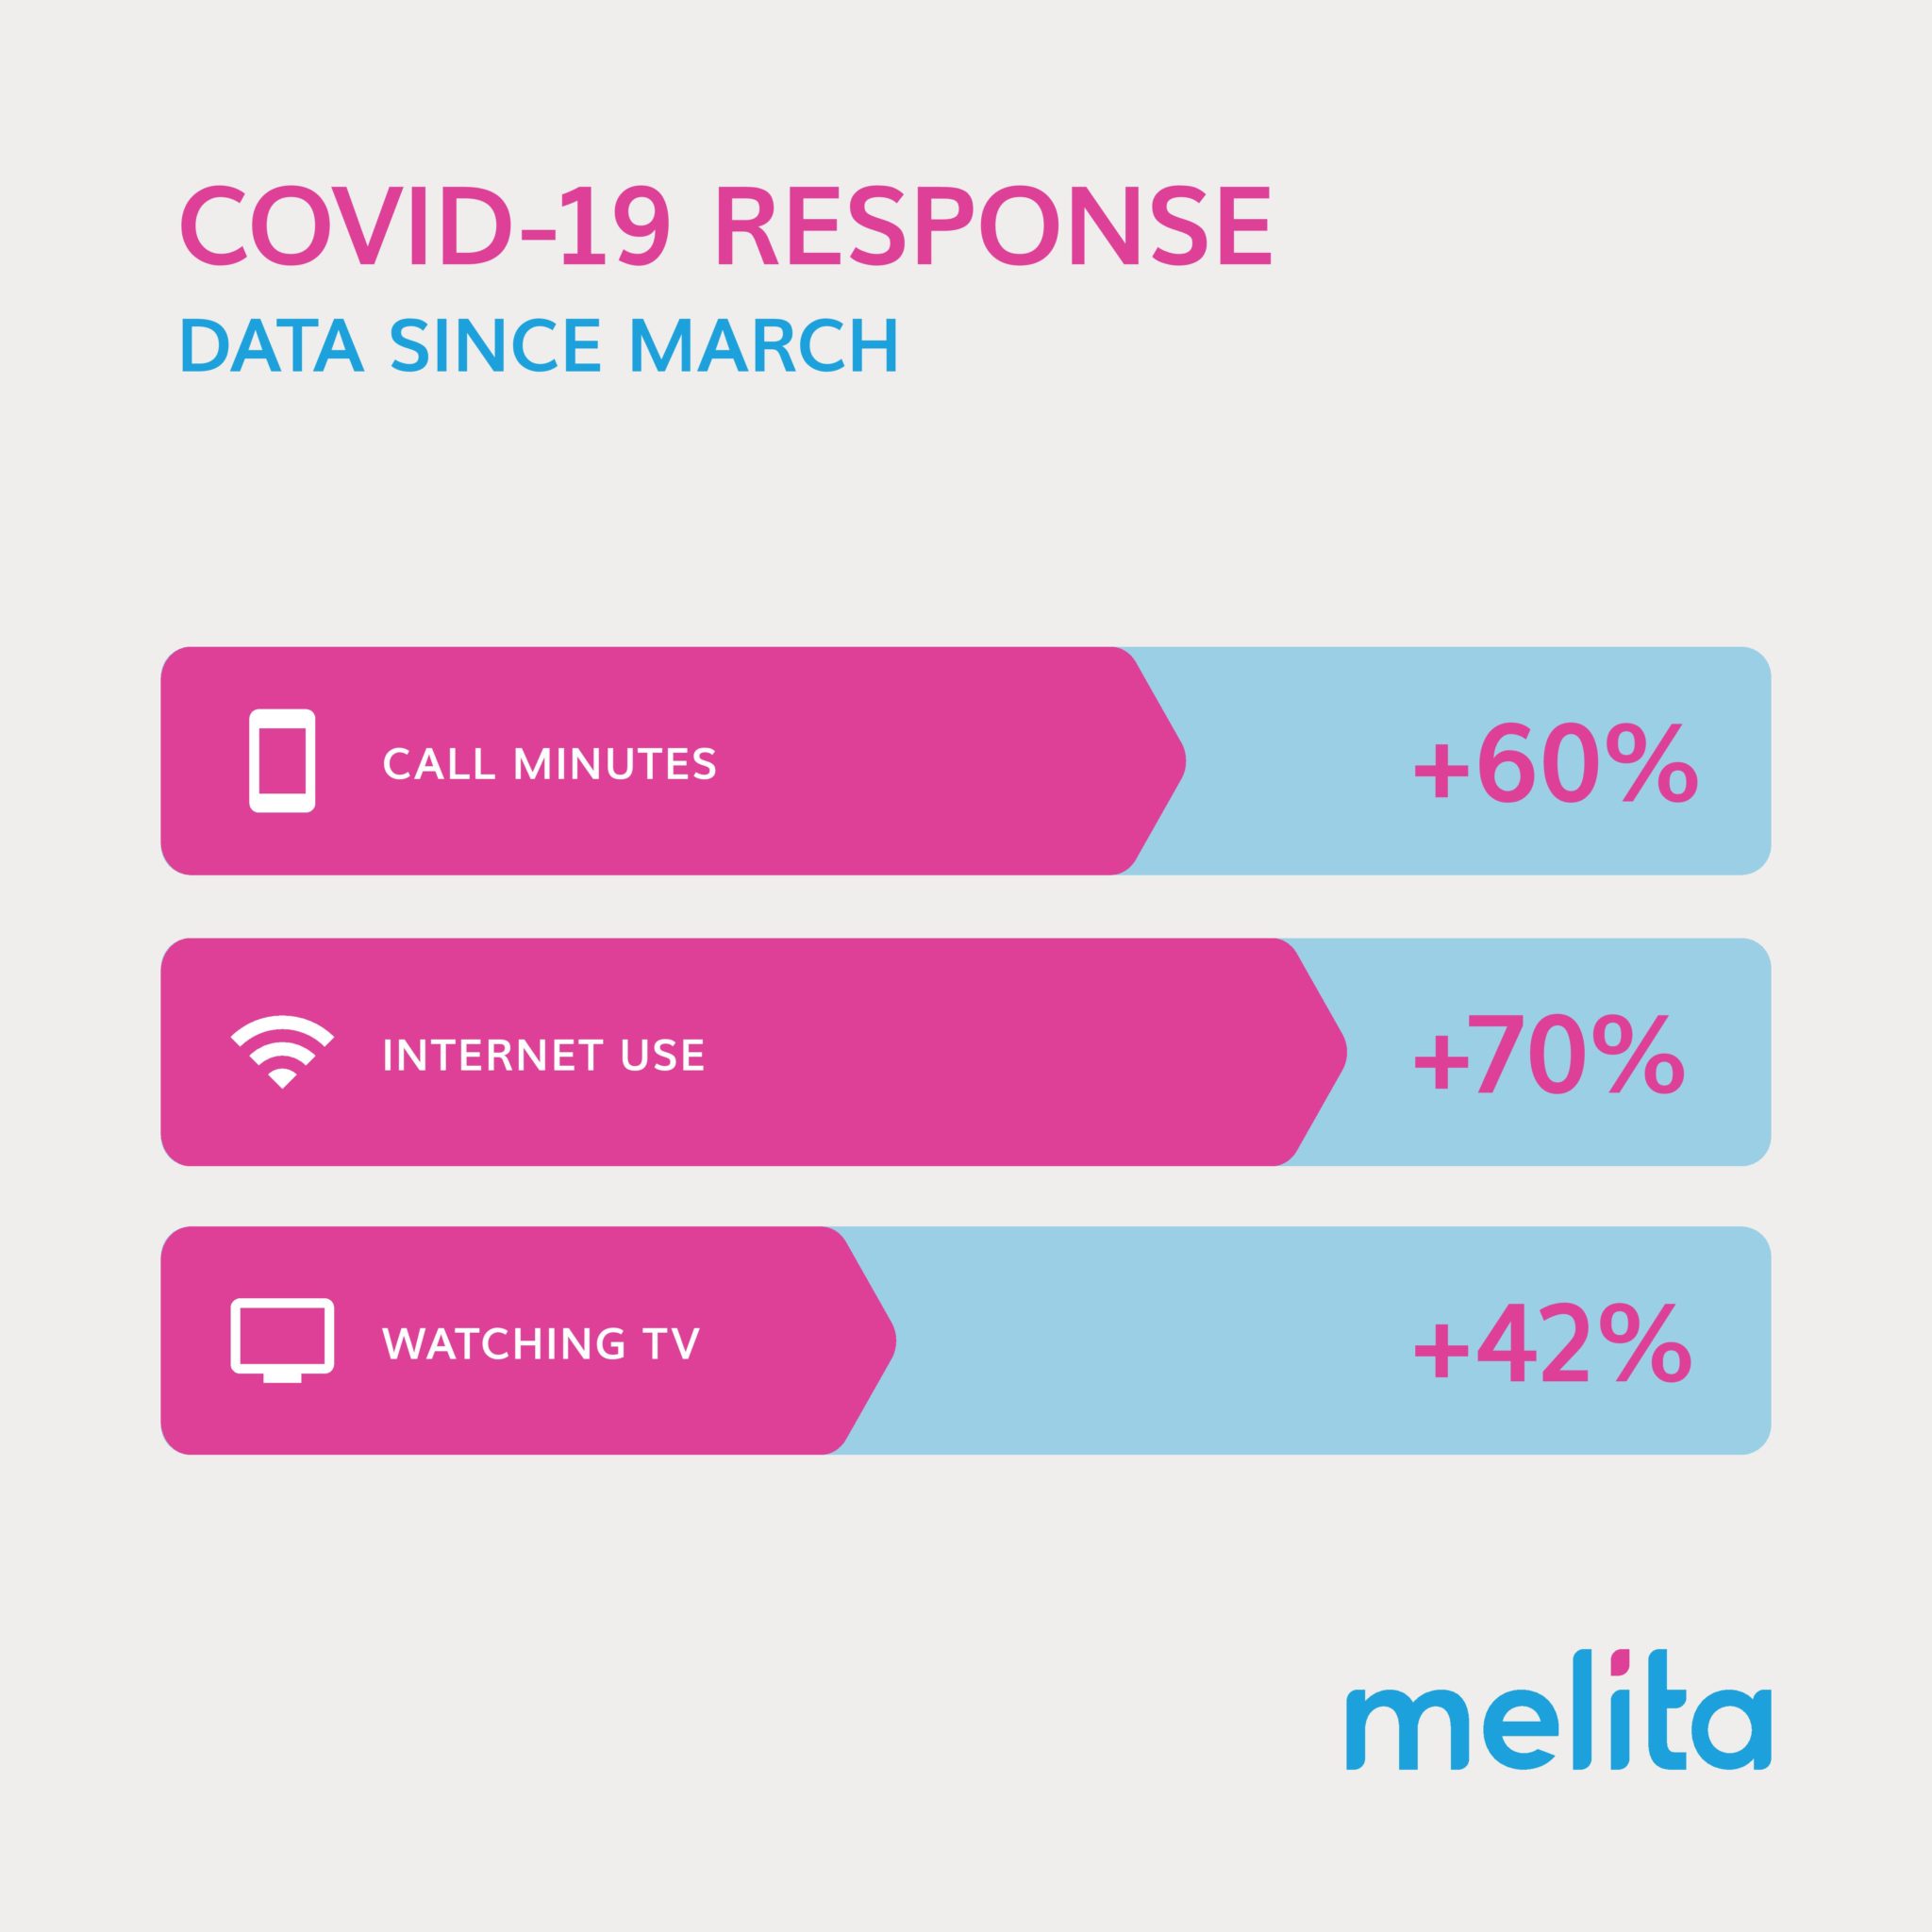 Covid-19 transforms use of communications services